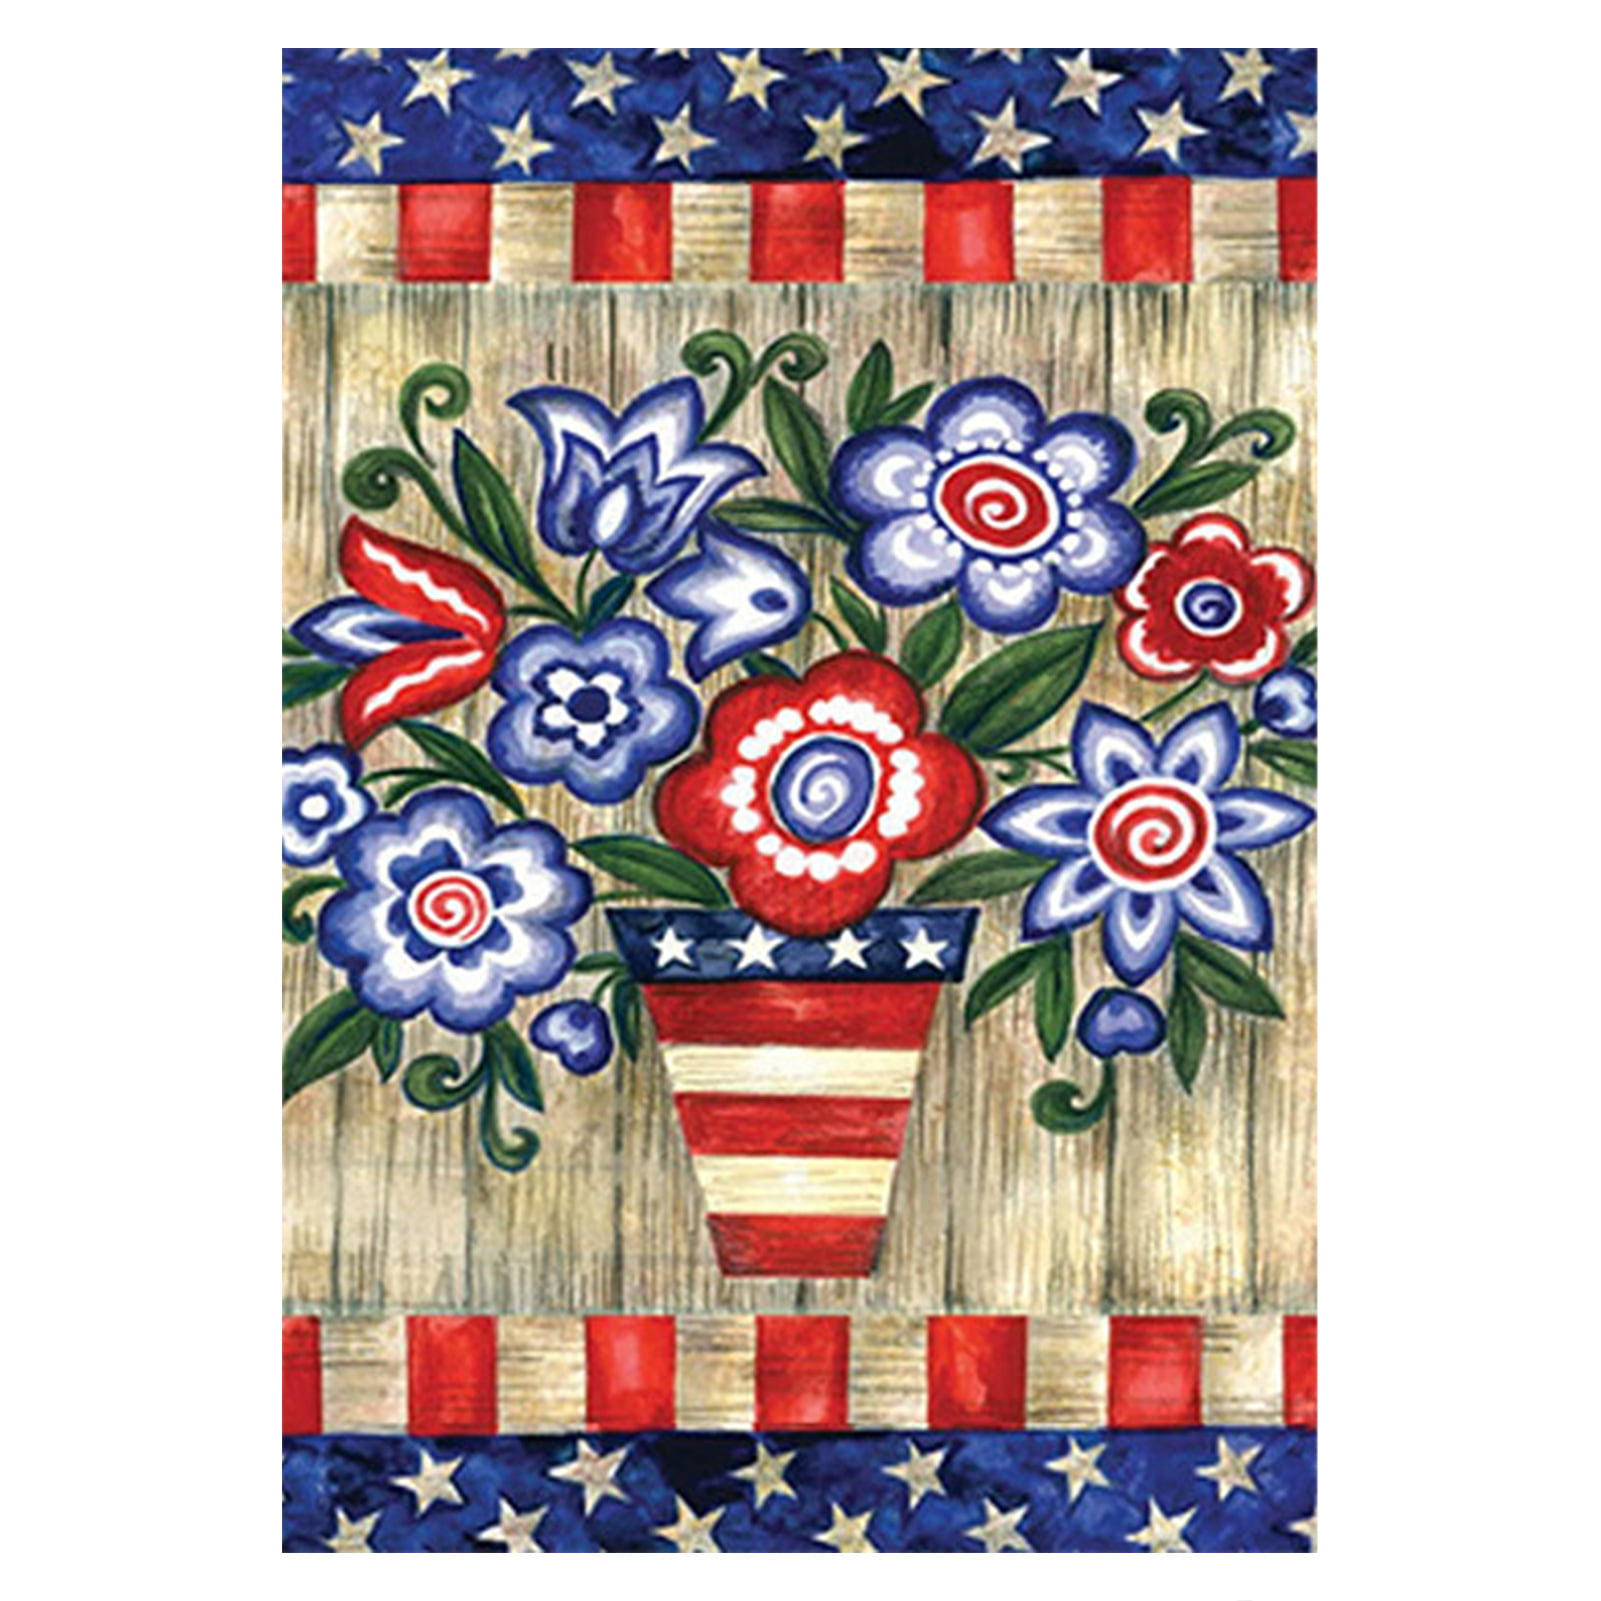 Details about   12x18" American Garden Flag Yard Banner Outdoor Decor Decoration Double-sided 